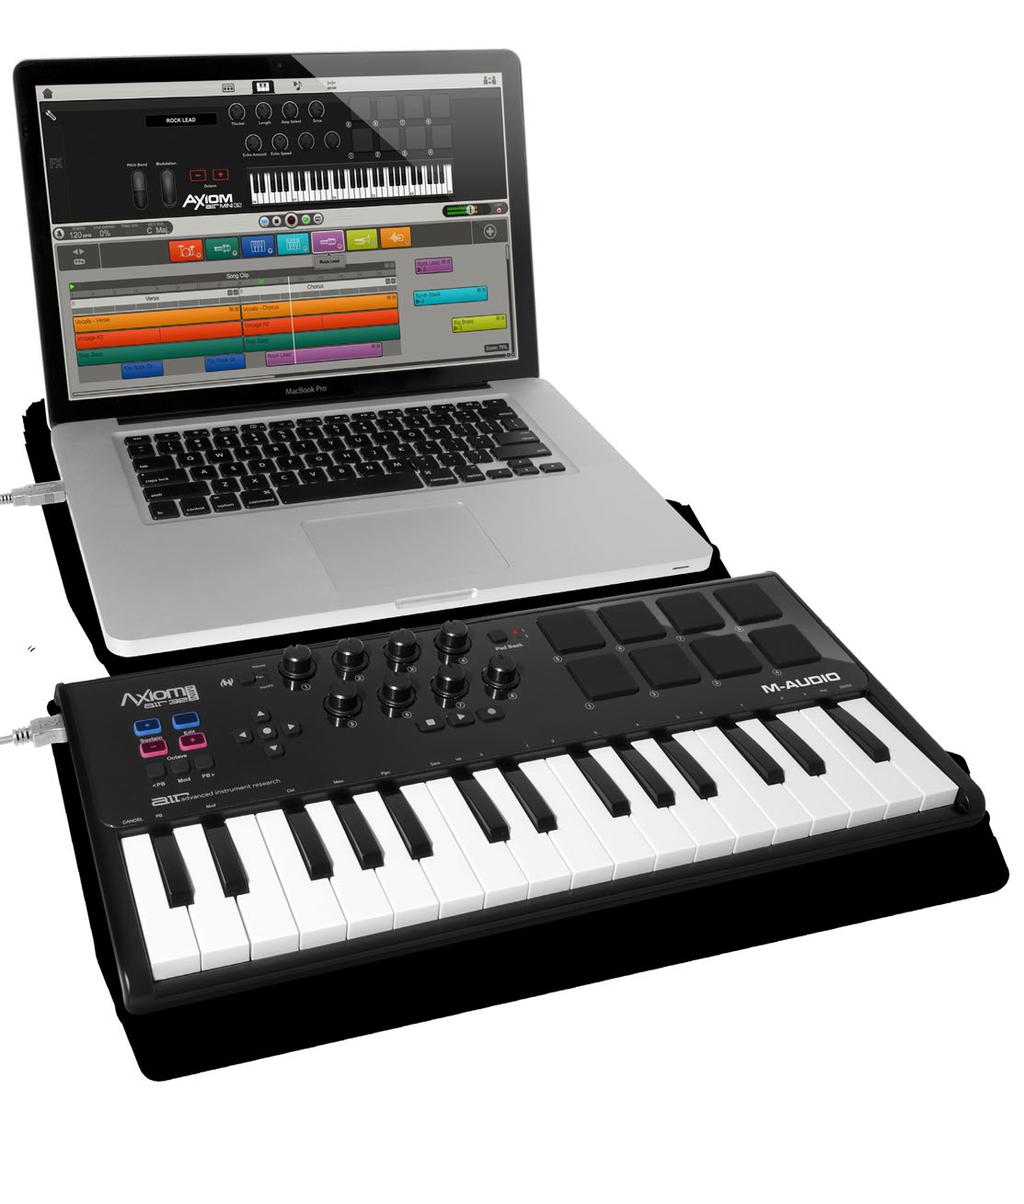 2013 PRODUCT GUIDE THE MOST INTUITIVE SOFTWARE FOR MUSIC CREATION Designed from the ground up to deliver hassle-free integration with any current-generation M-Audio keyboard, Ignite provides a